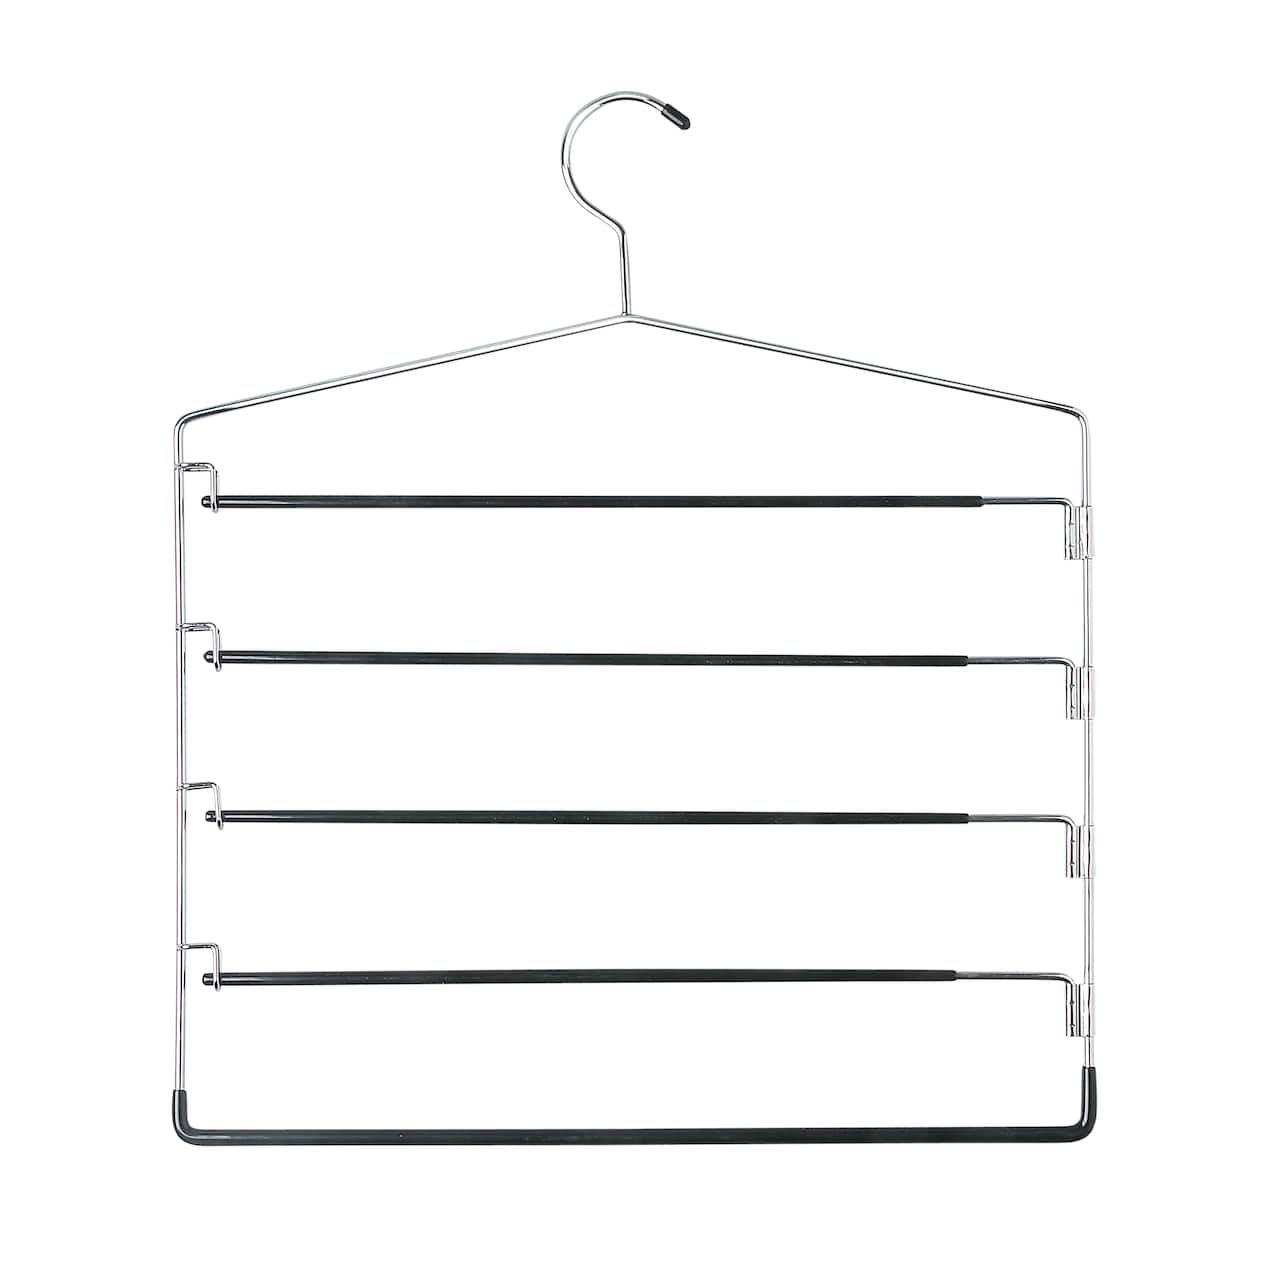 15 Packs: 2 ct. (30 total) Honey Can Do 5-Tier Swing Arm Pant Hangers